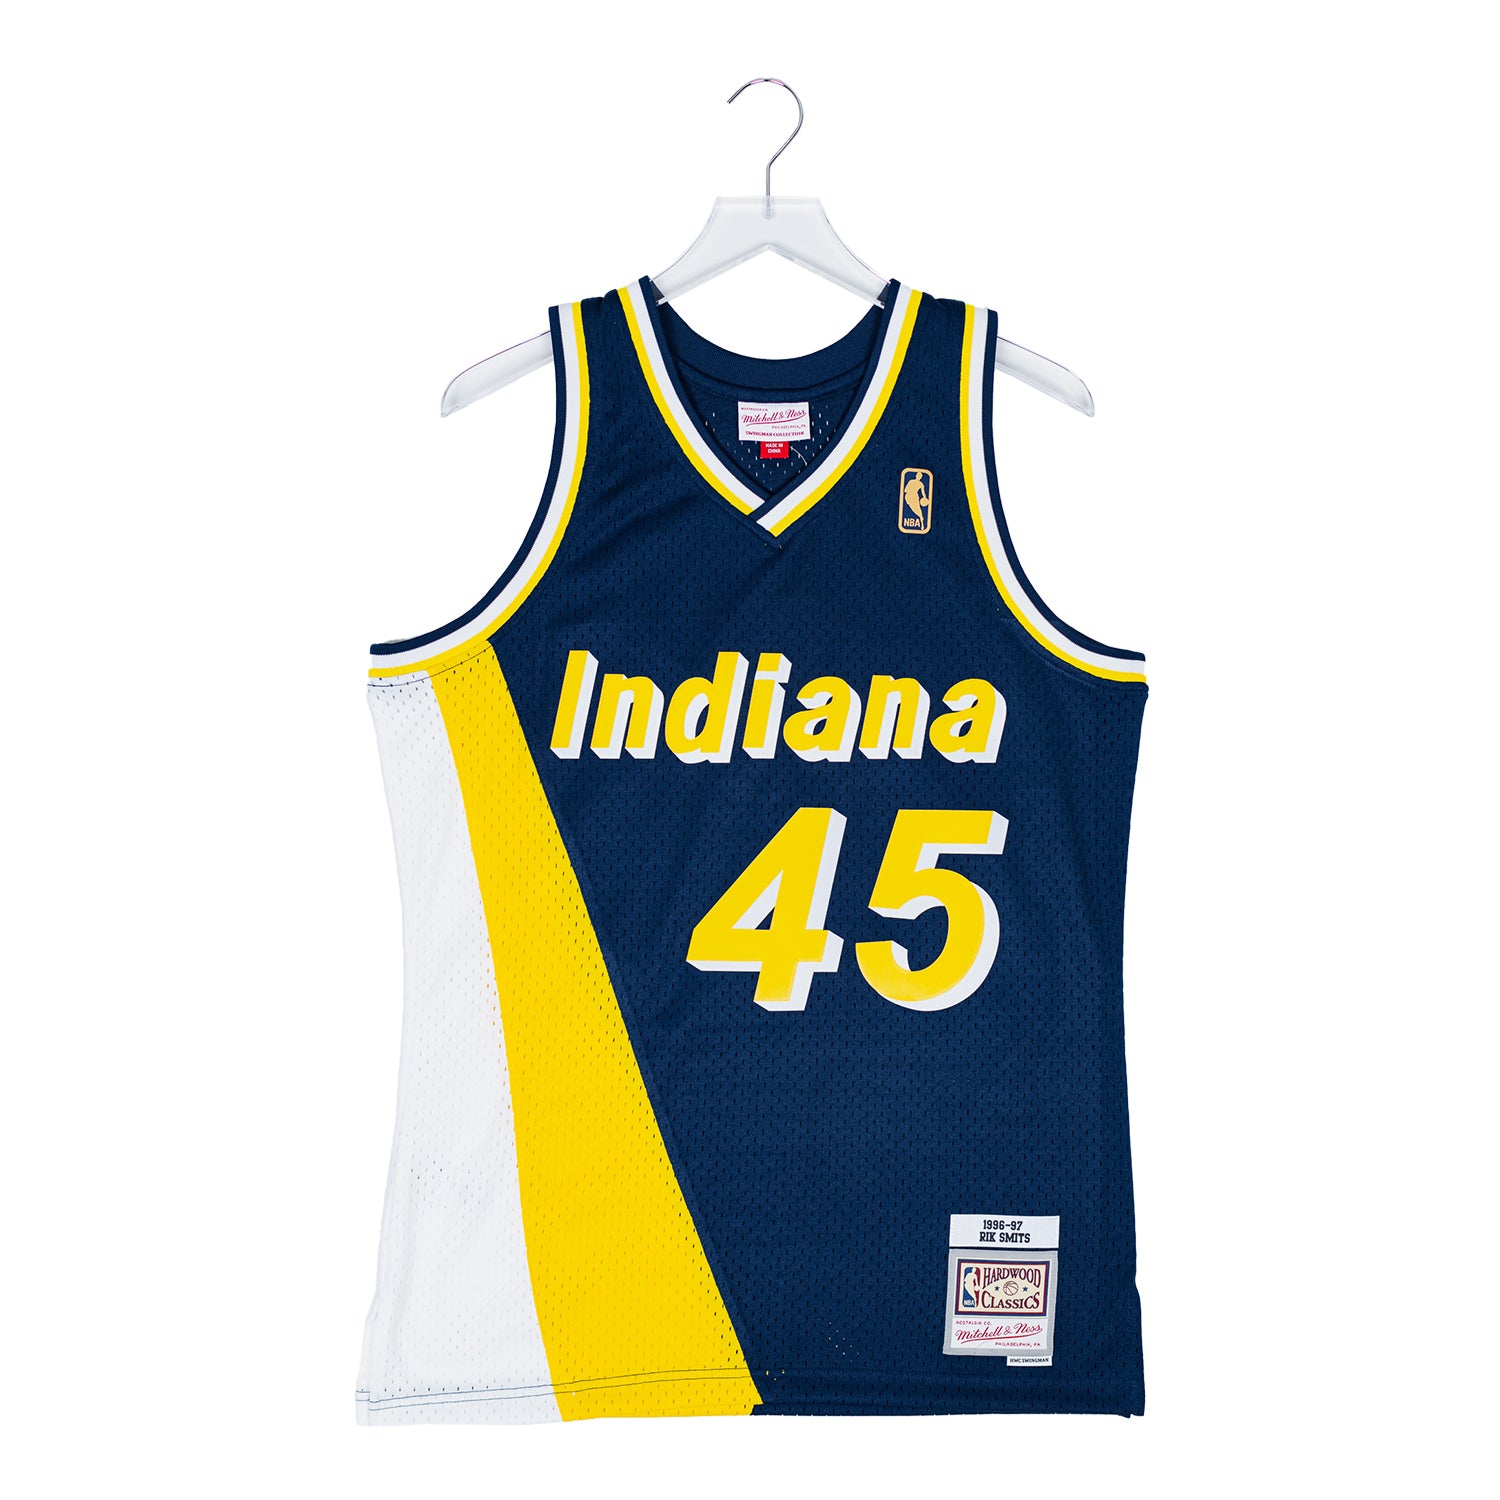 Mitchell & Ness Hardwood Classics NBA Jersey for Sale in